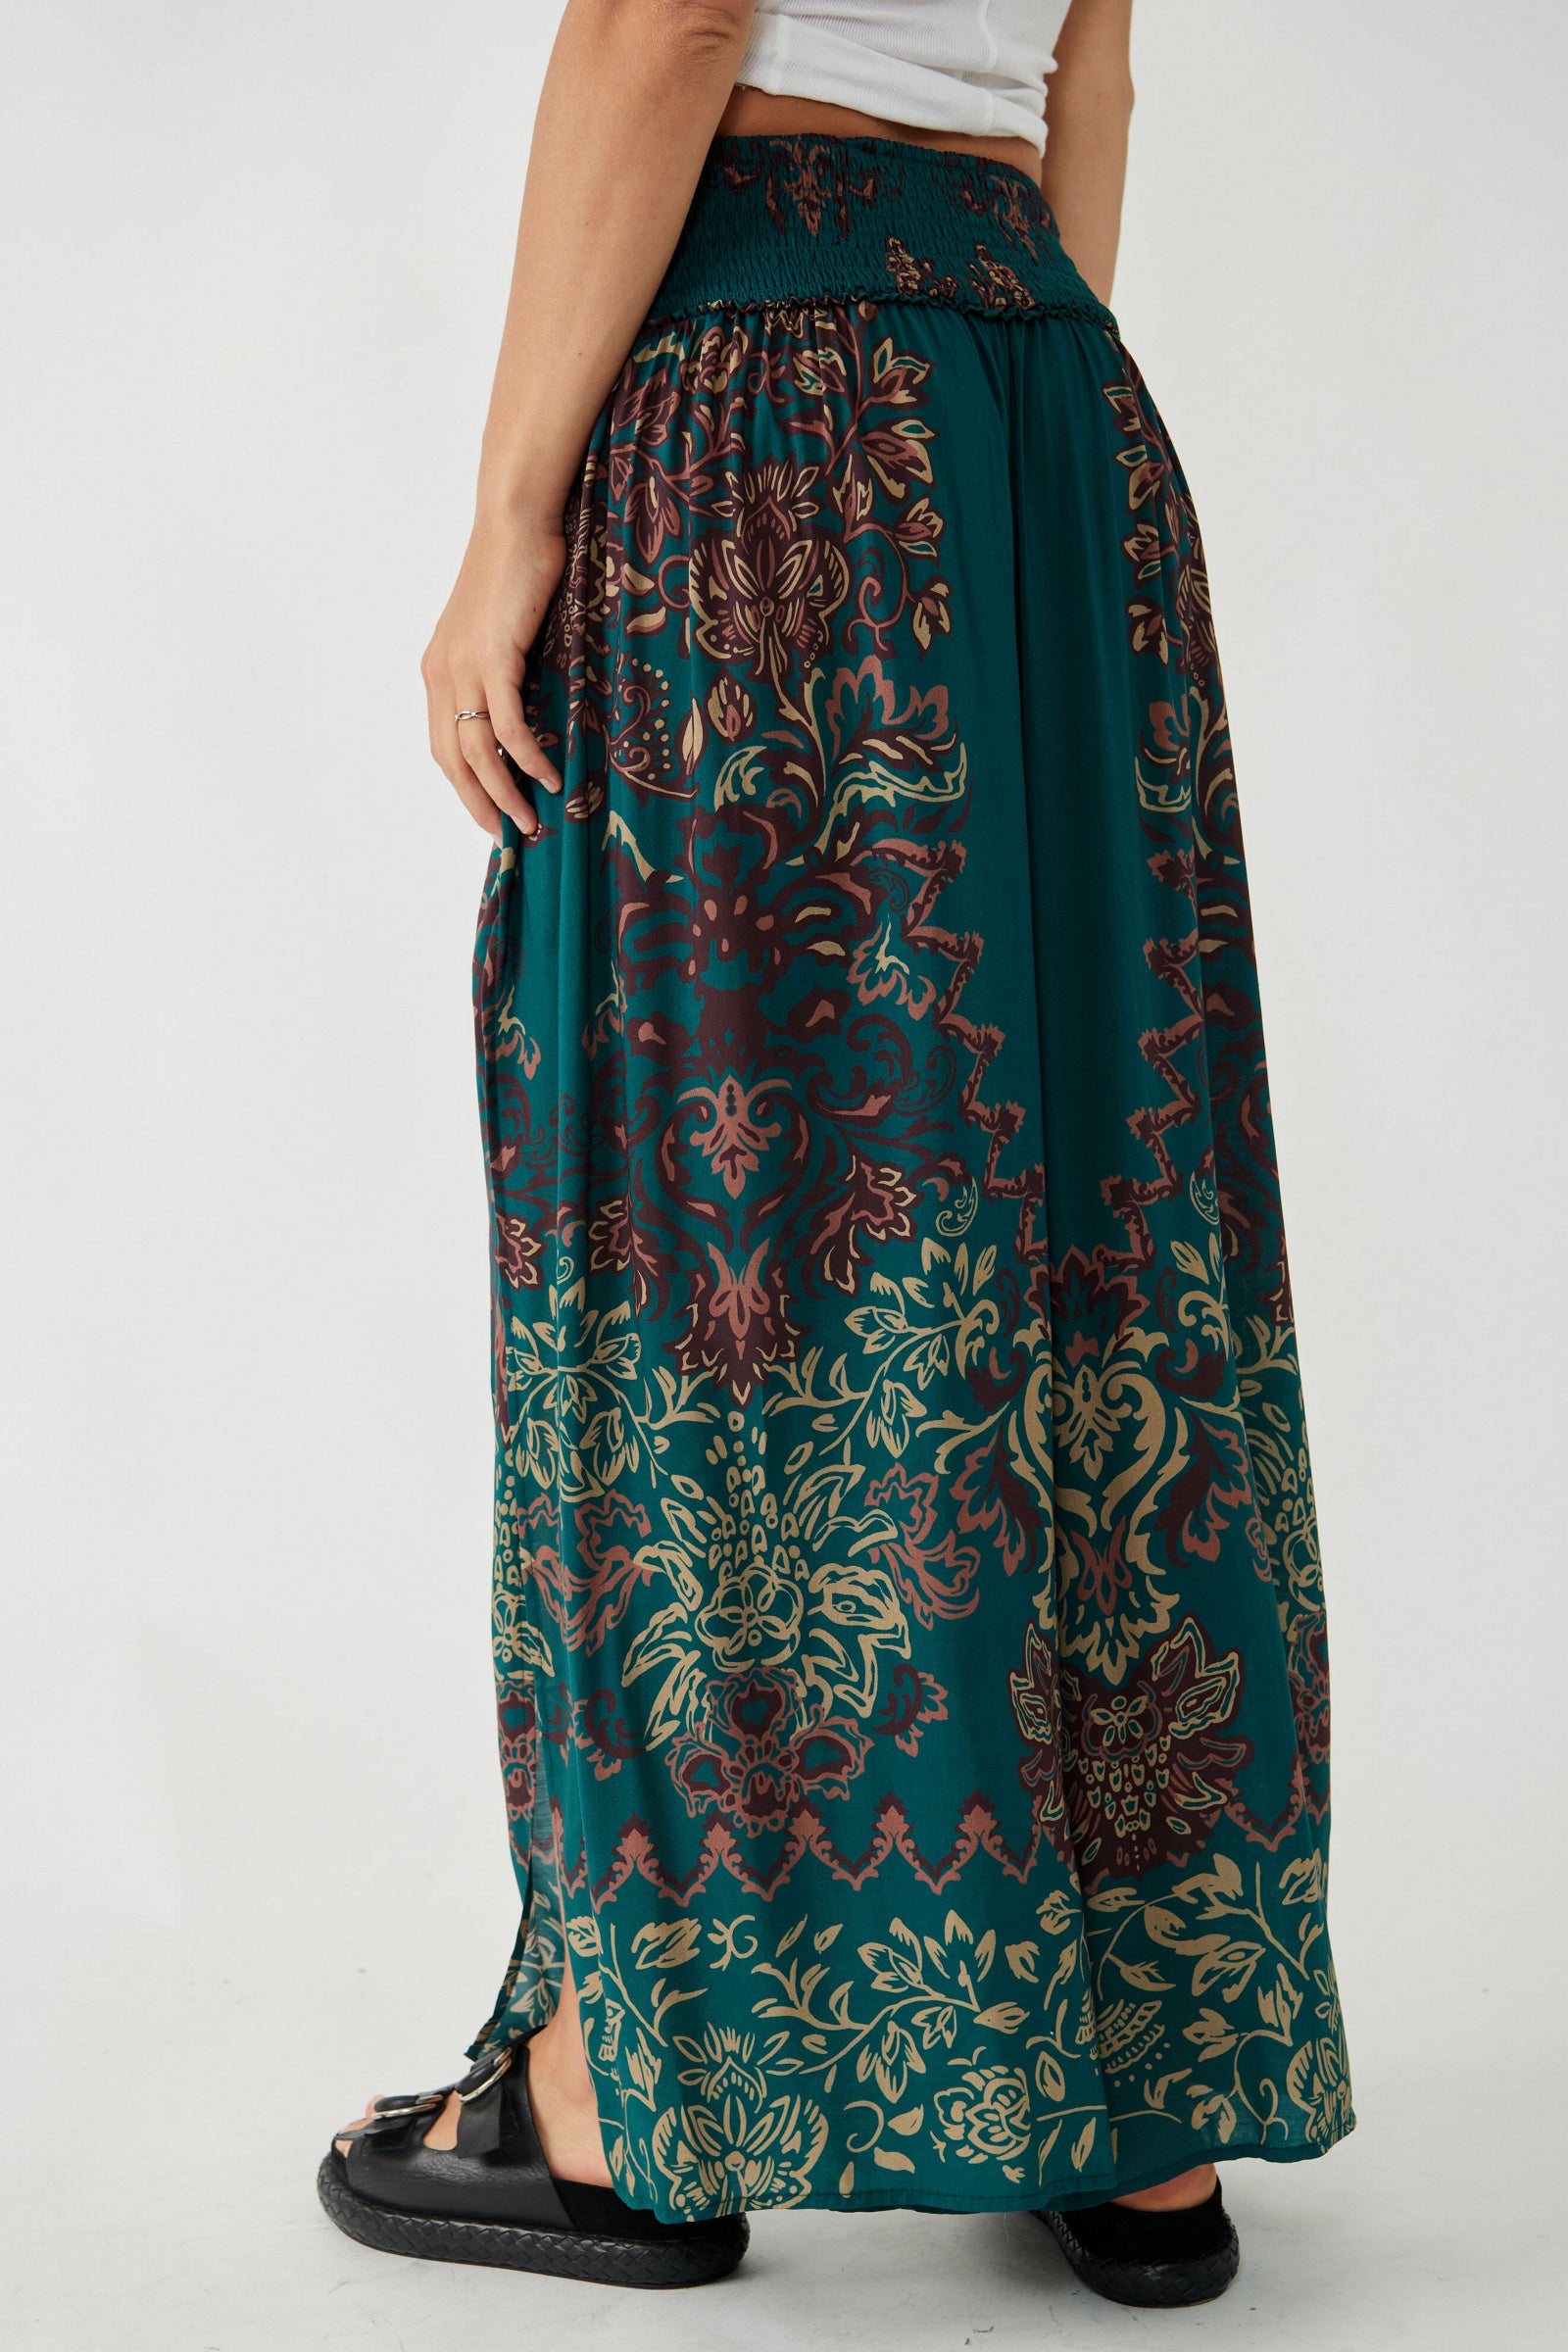 Free People Sweet Arrival Wide Leg Pants at Leaf Boutique